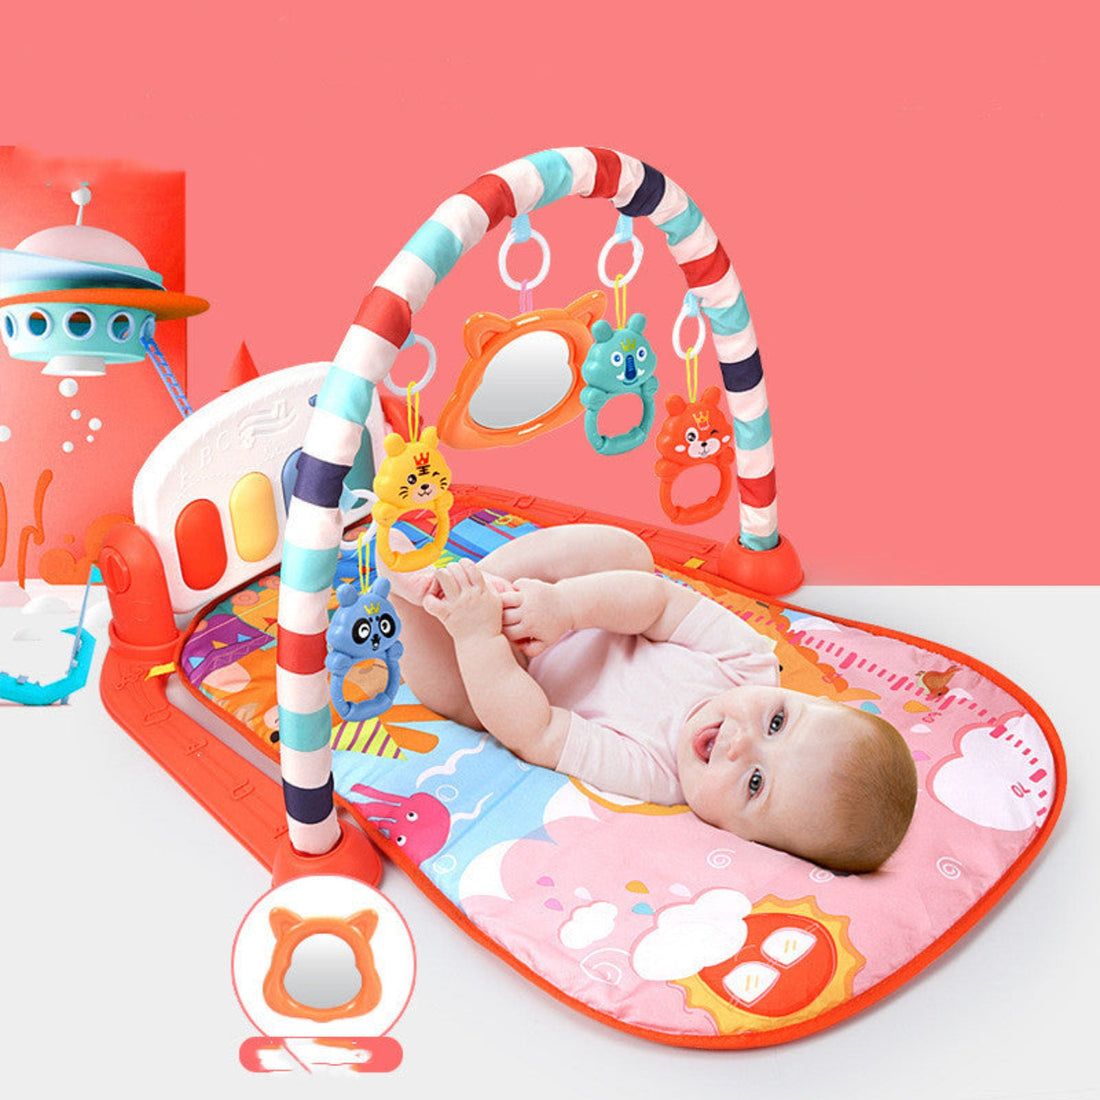 Multifunctional baby fitness rack with colorful design